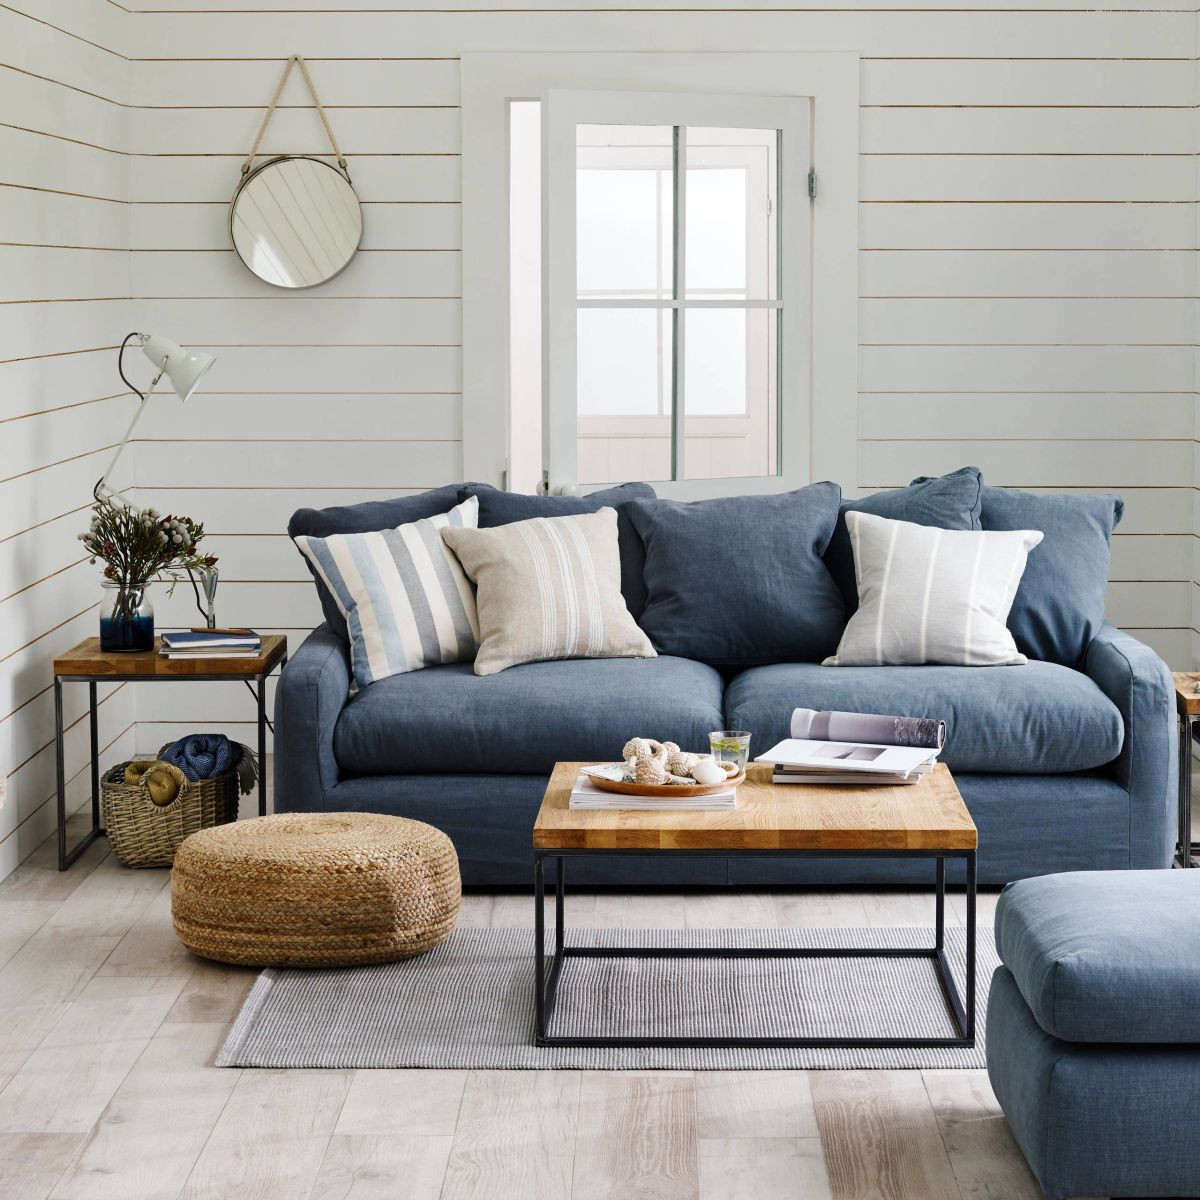 Living Room Wall
 5 Reasons To Put Shiplap Walls In Every Room